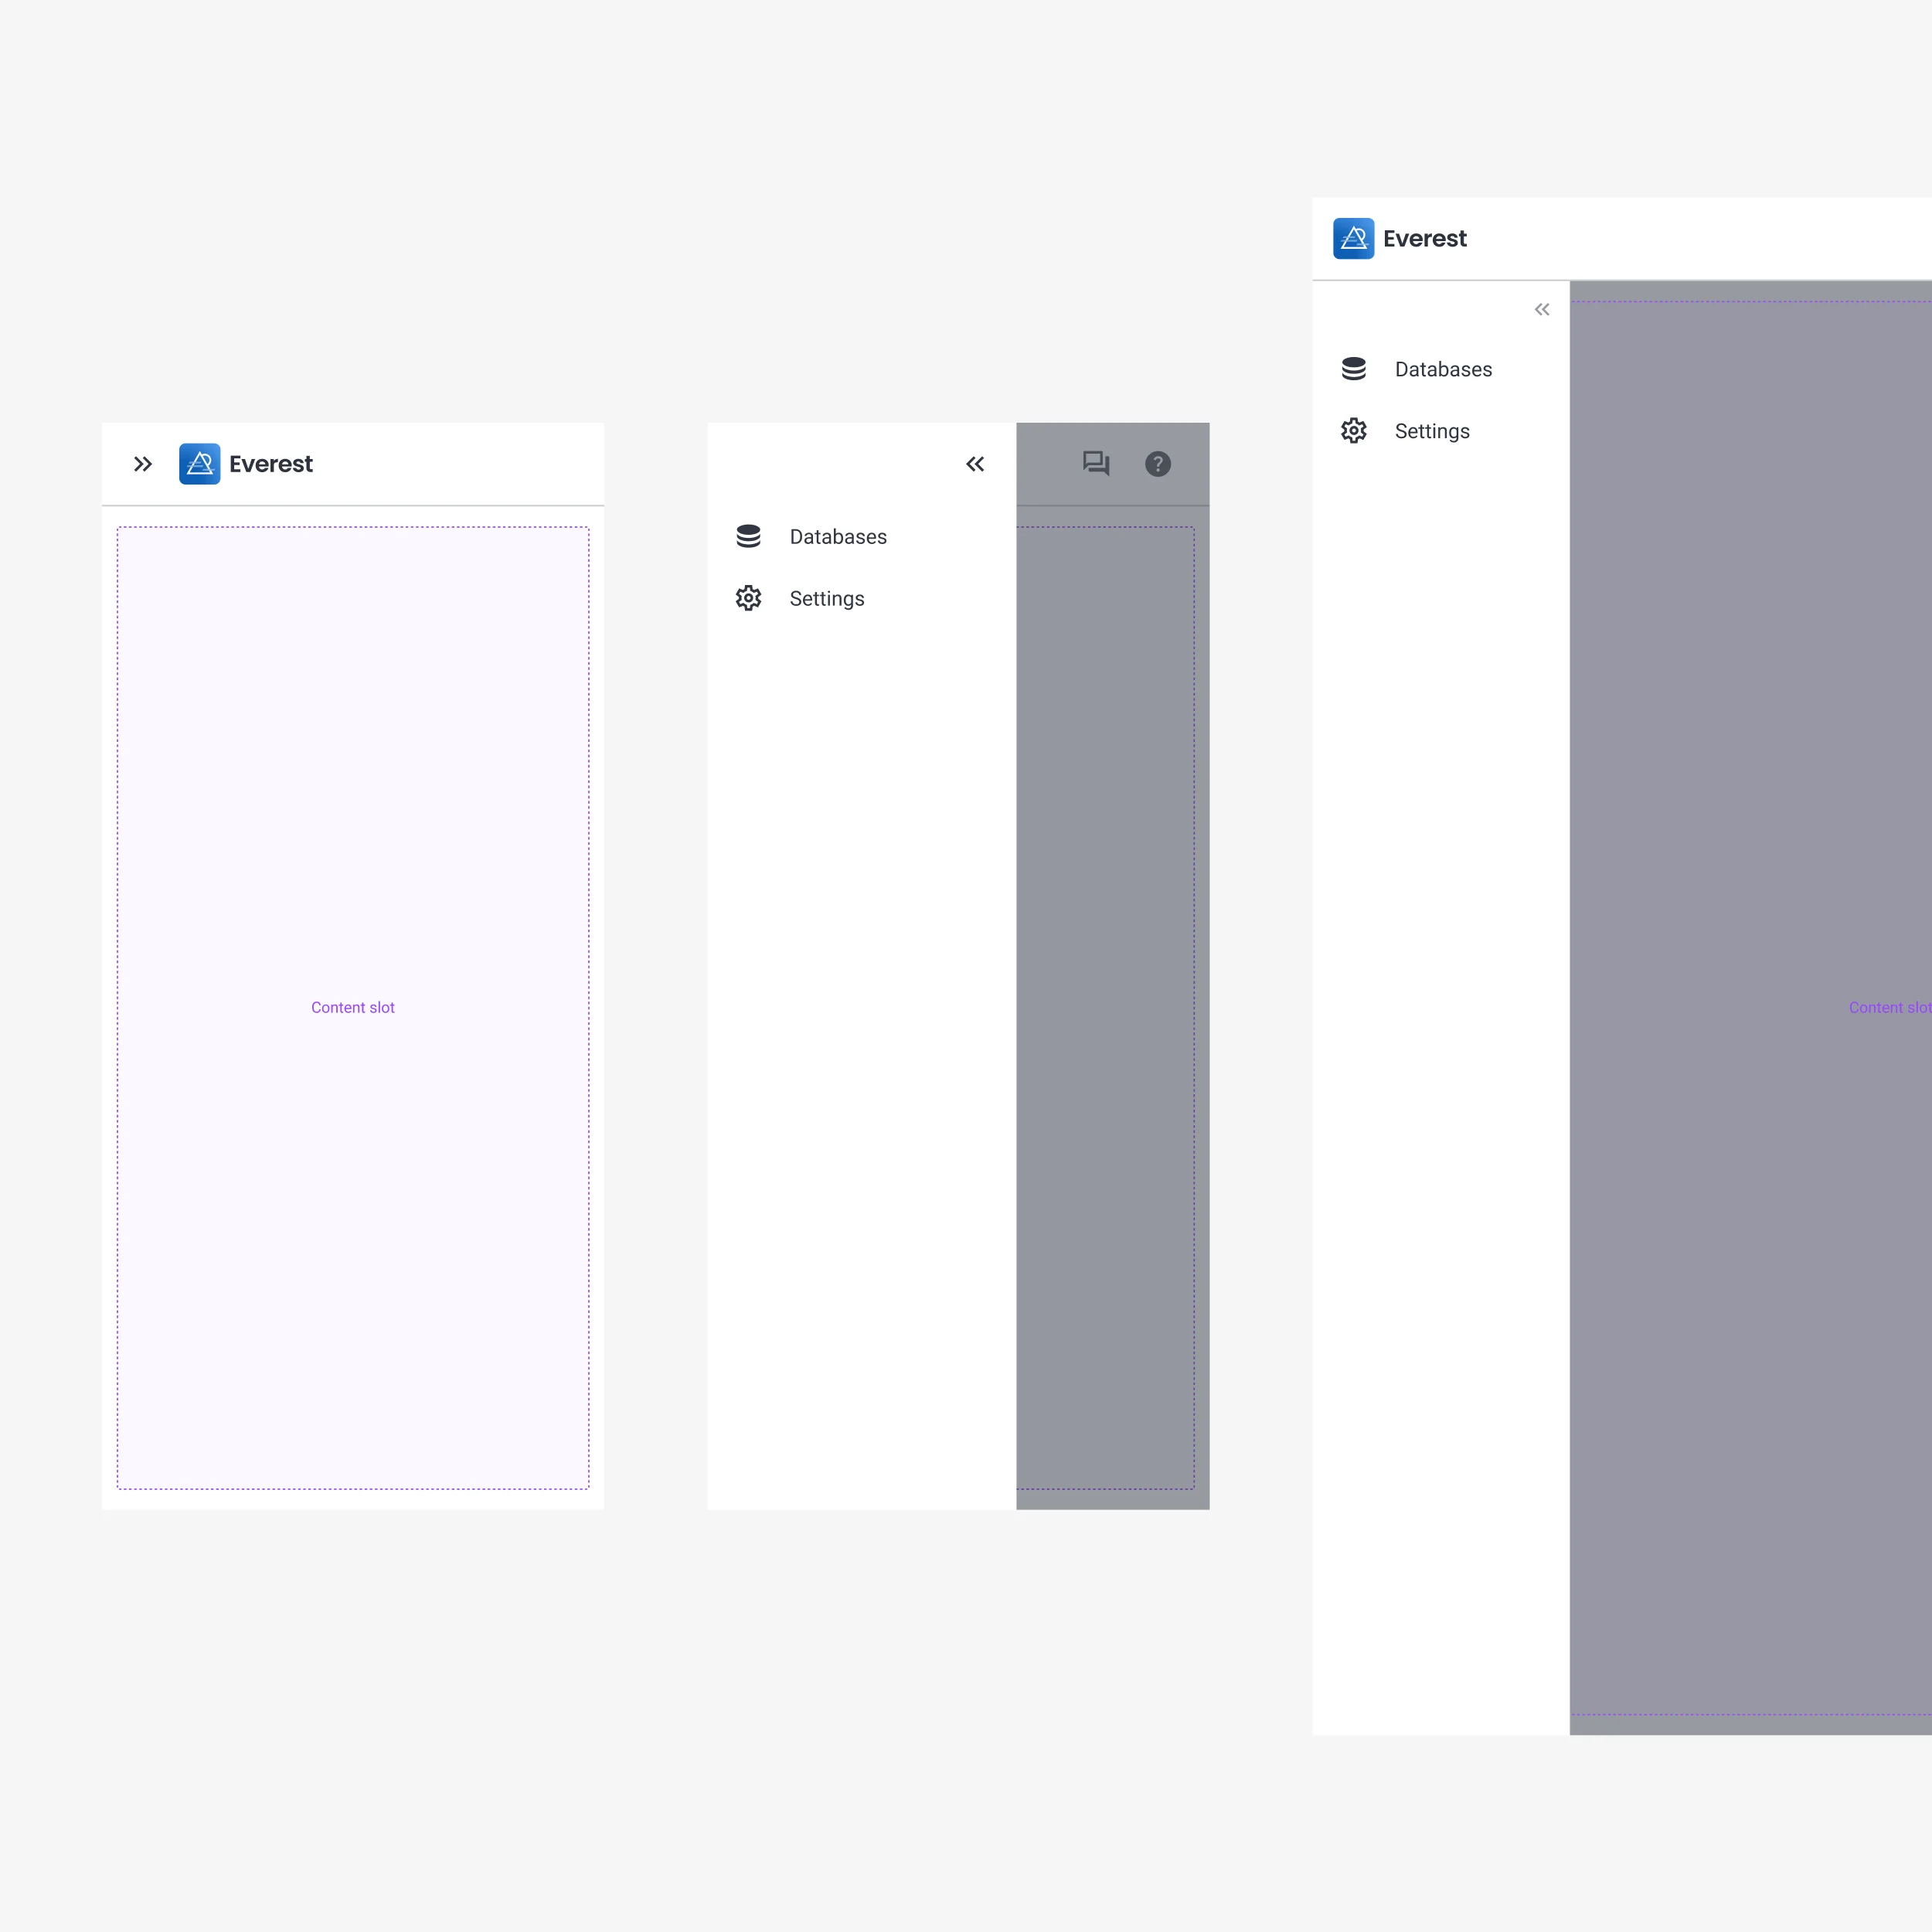 Previews of design system patterns: a mobile device main menu example collapsed, then expanded, and a third example in a tablet-sized screen.